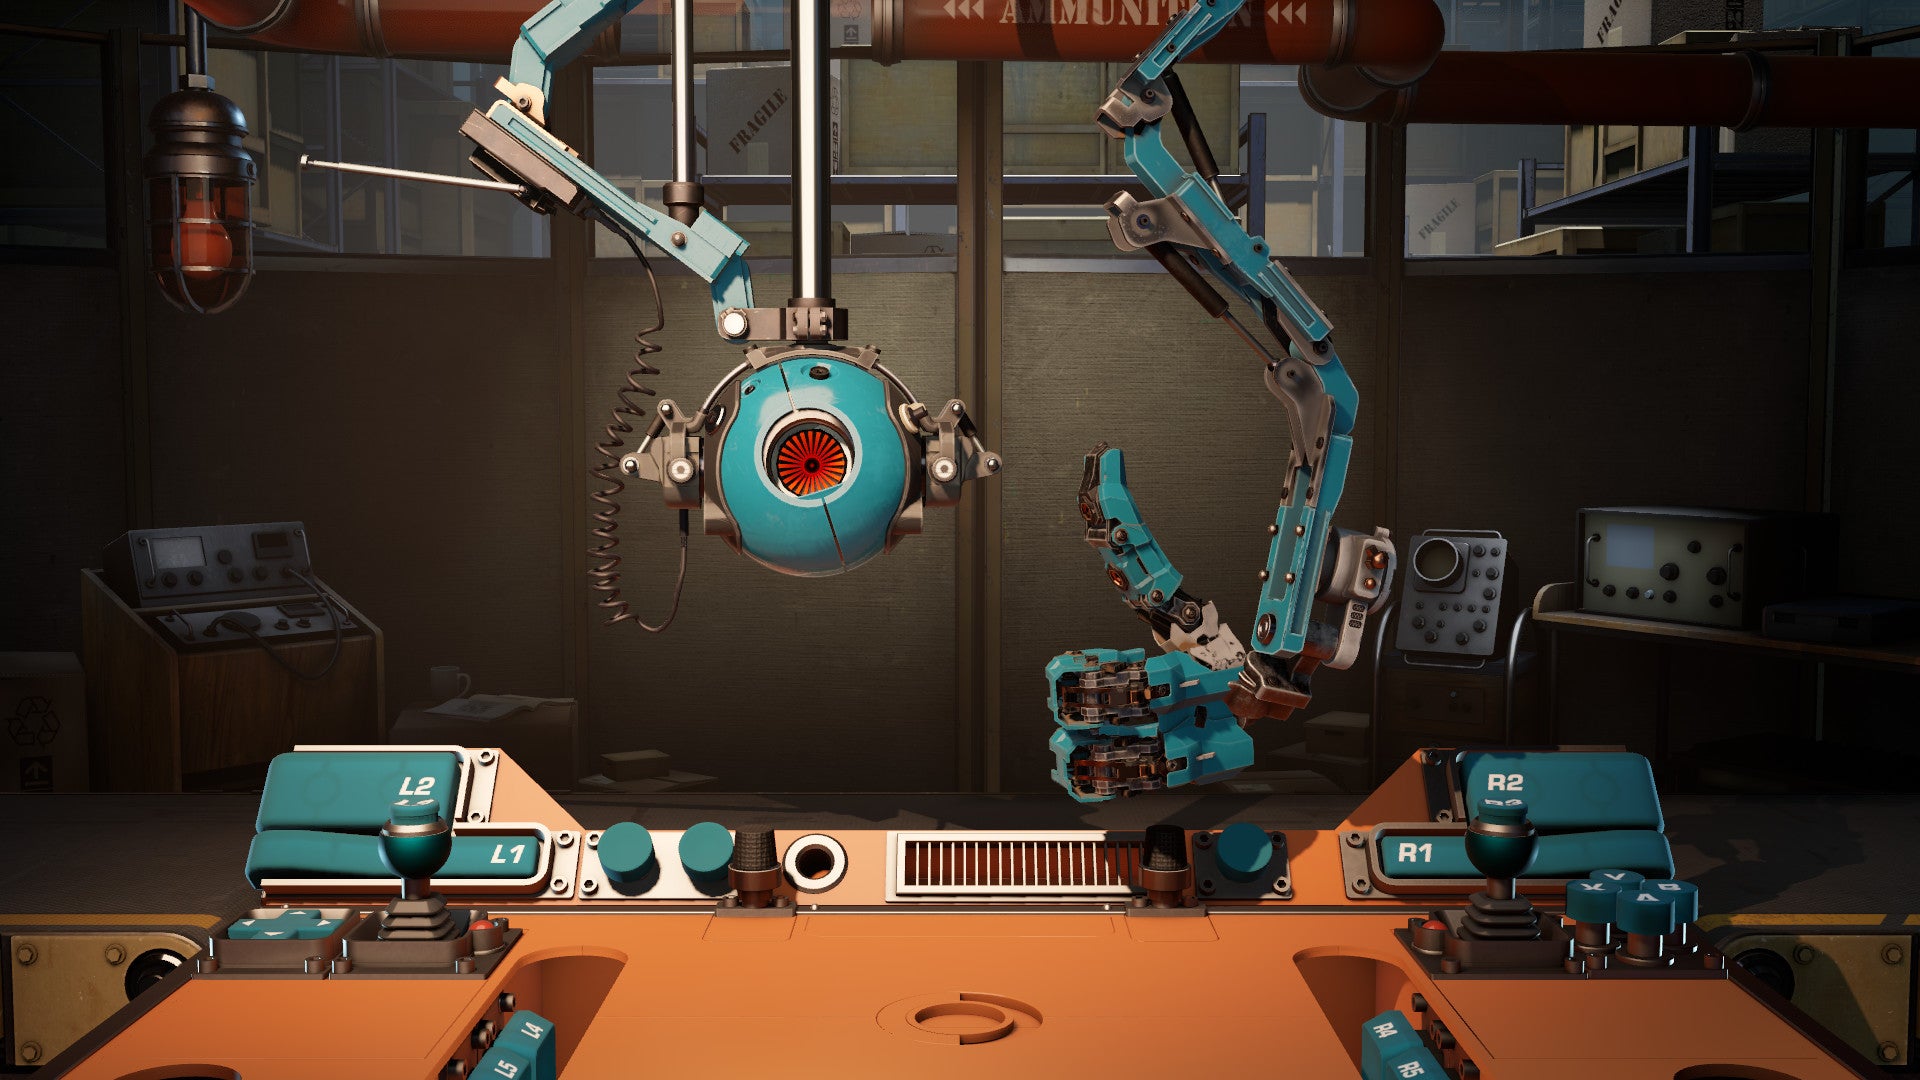 A screenshot of Aperture Desk Job, a free short game, showing a blue personality core giving thumbs up with a robot arm.